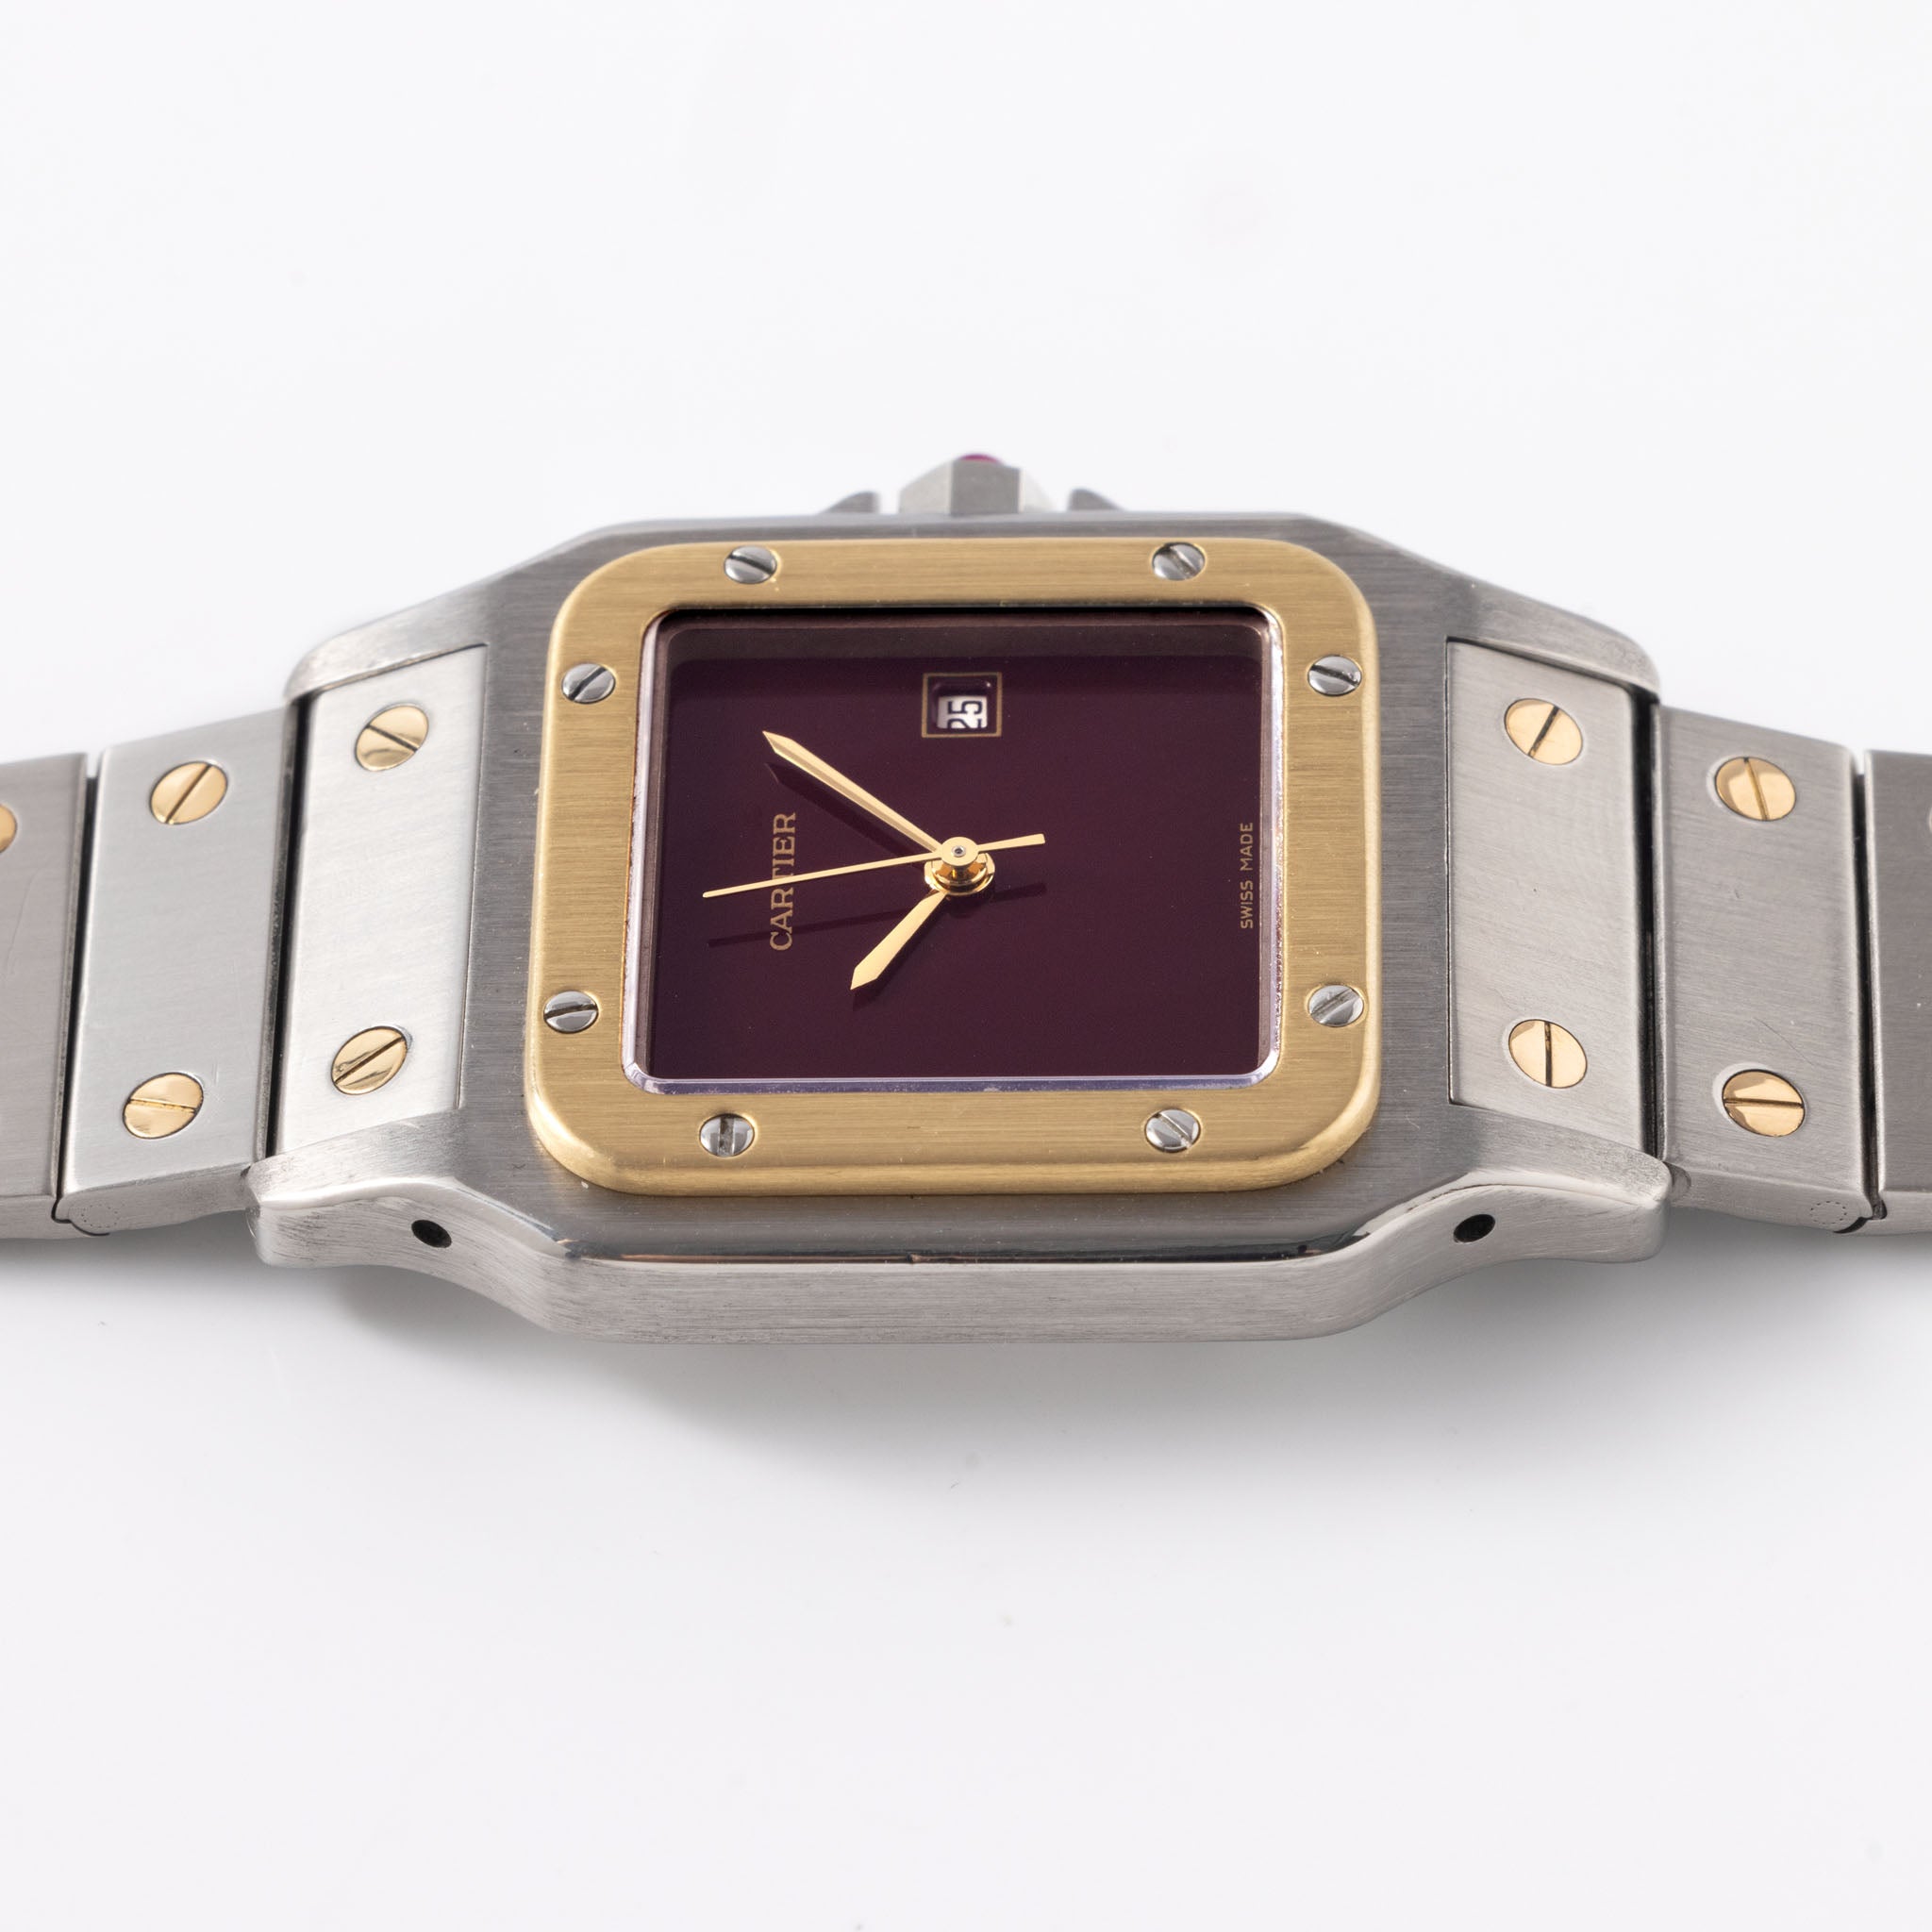 Cartier Santos 2961 Steel and Gold with Burgundy Dial